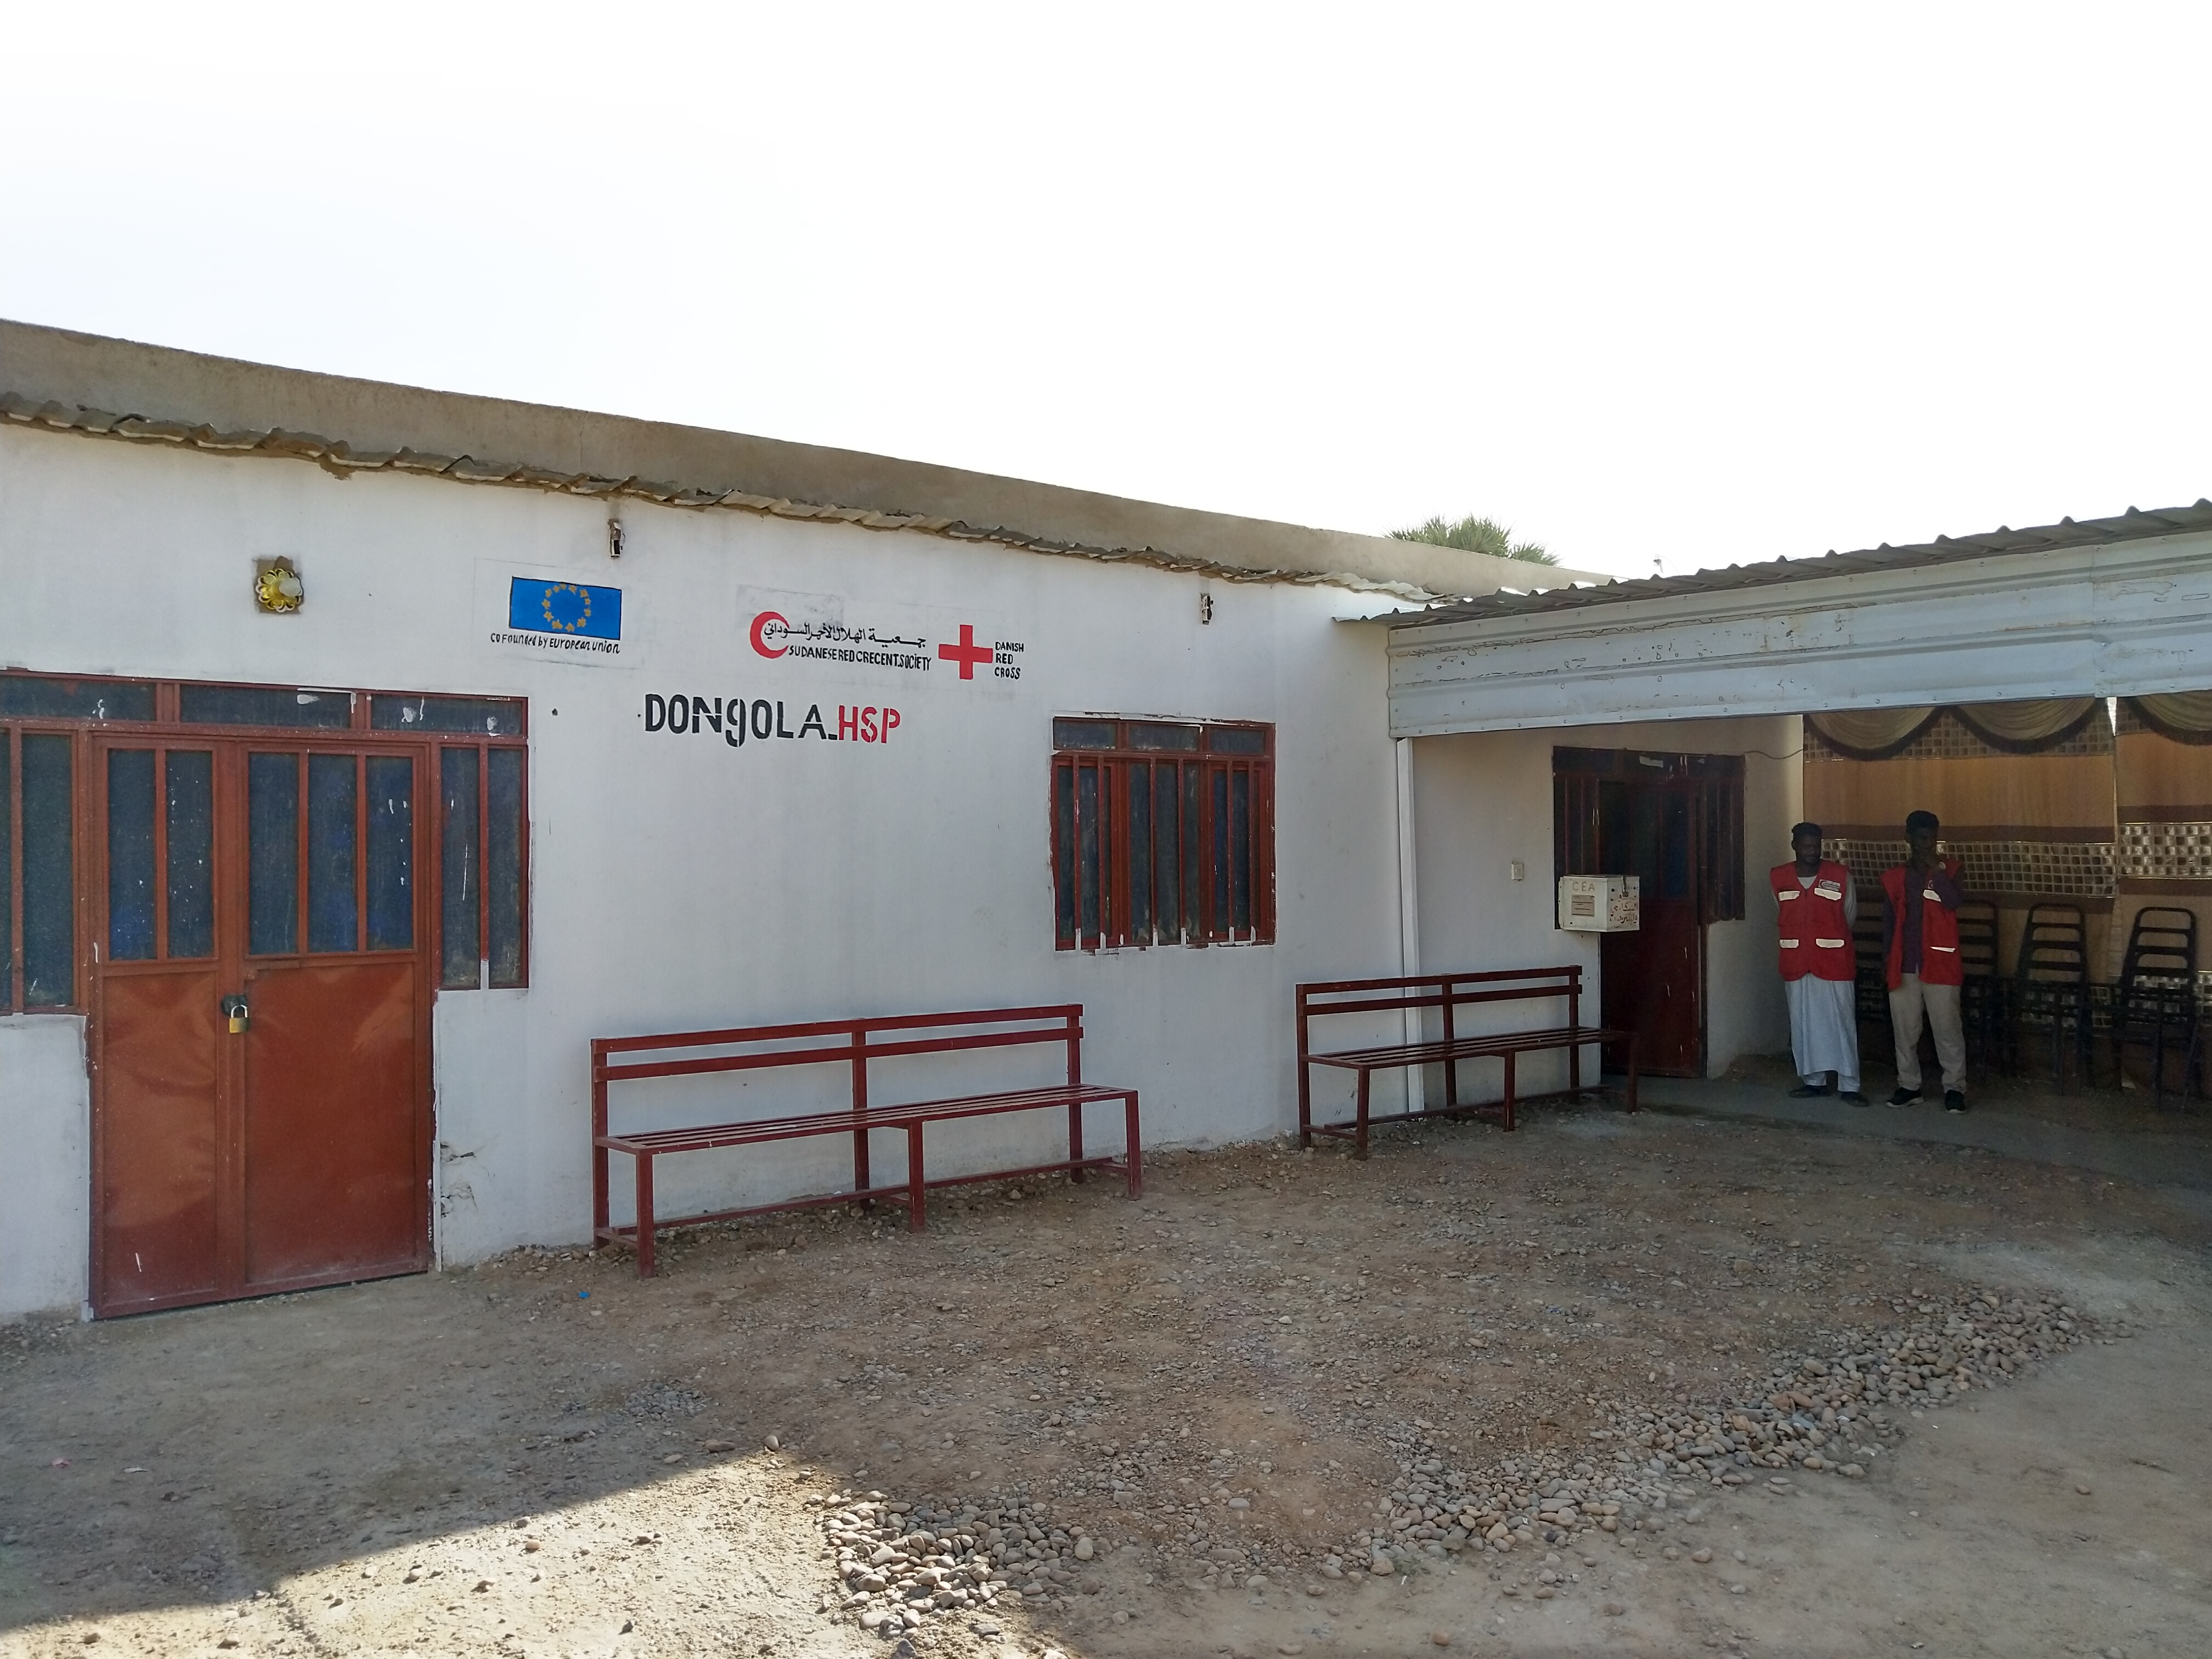  One of 11 strategically placed Humanitarian Service Points in key areas across Northern and Eastern Sudan, providing secure spaces for socializing, children's play, and intercultural activities.